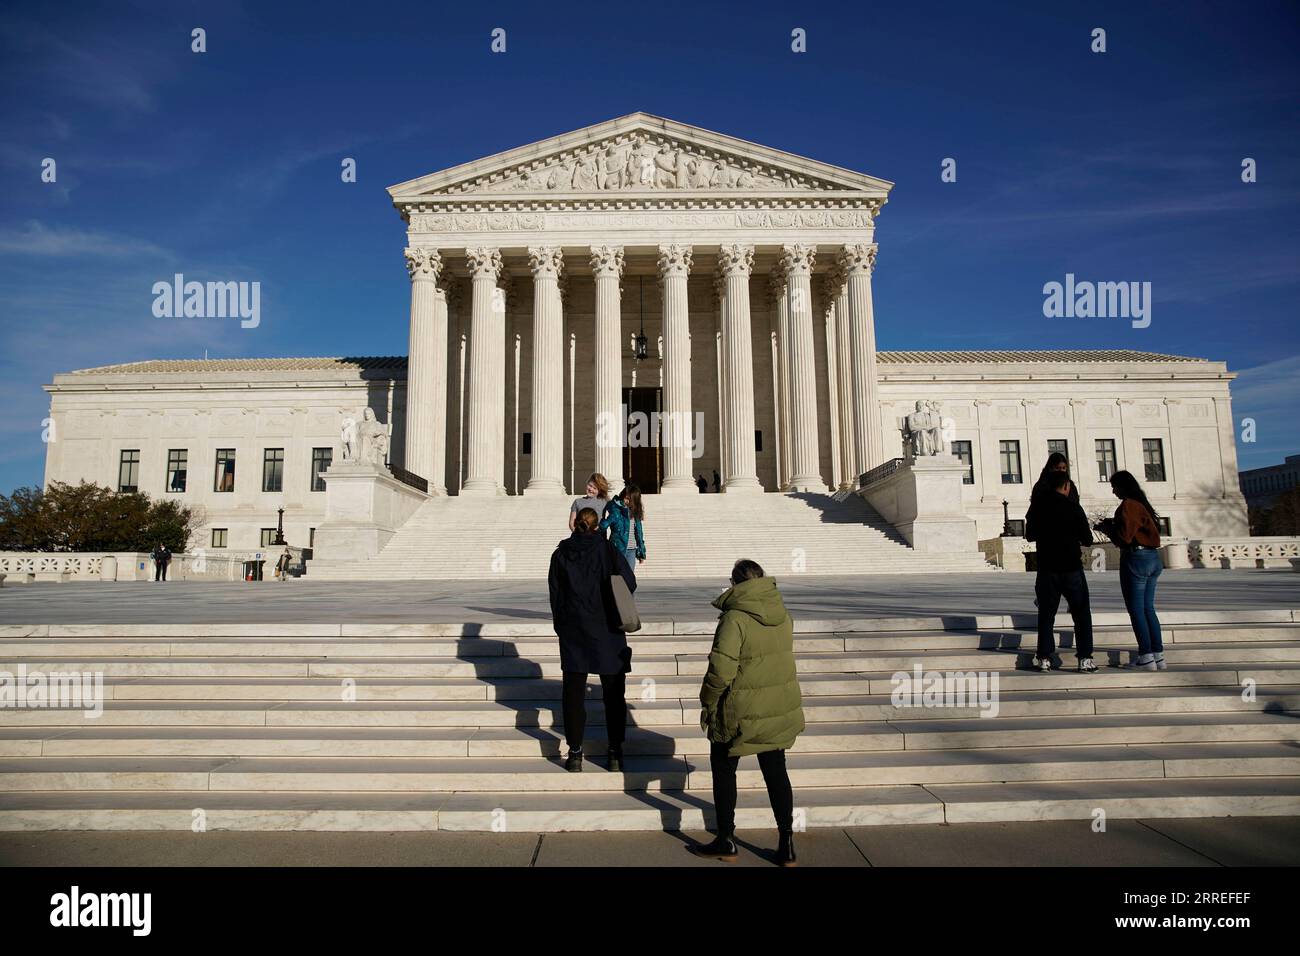 220226 -- WASHINGTON, Feb. 26, 2022 -- Photo taken on Feb. 25, 2022 shows the U.S. Supreme Court building in Washington, D.C., the United States. U.S. President Joe Biden said on Friday that he s nominating Judge Ketanji Brown Jackson for the Supreme Court, setting in motion a process for the first African American woman to sit on its bench. Photo by /Xinhua U.S.-WASHINGTON, D.C.-BIDEN-SUPREME COURT-NOMINATION TingxShen PUBLICATIONxNOTxINxCHN Stock Photo